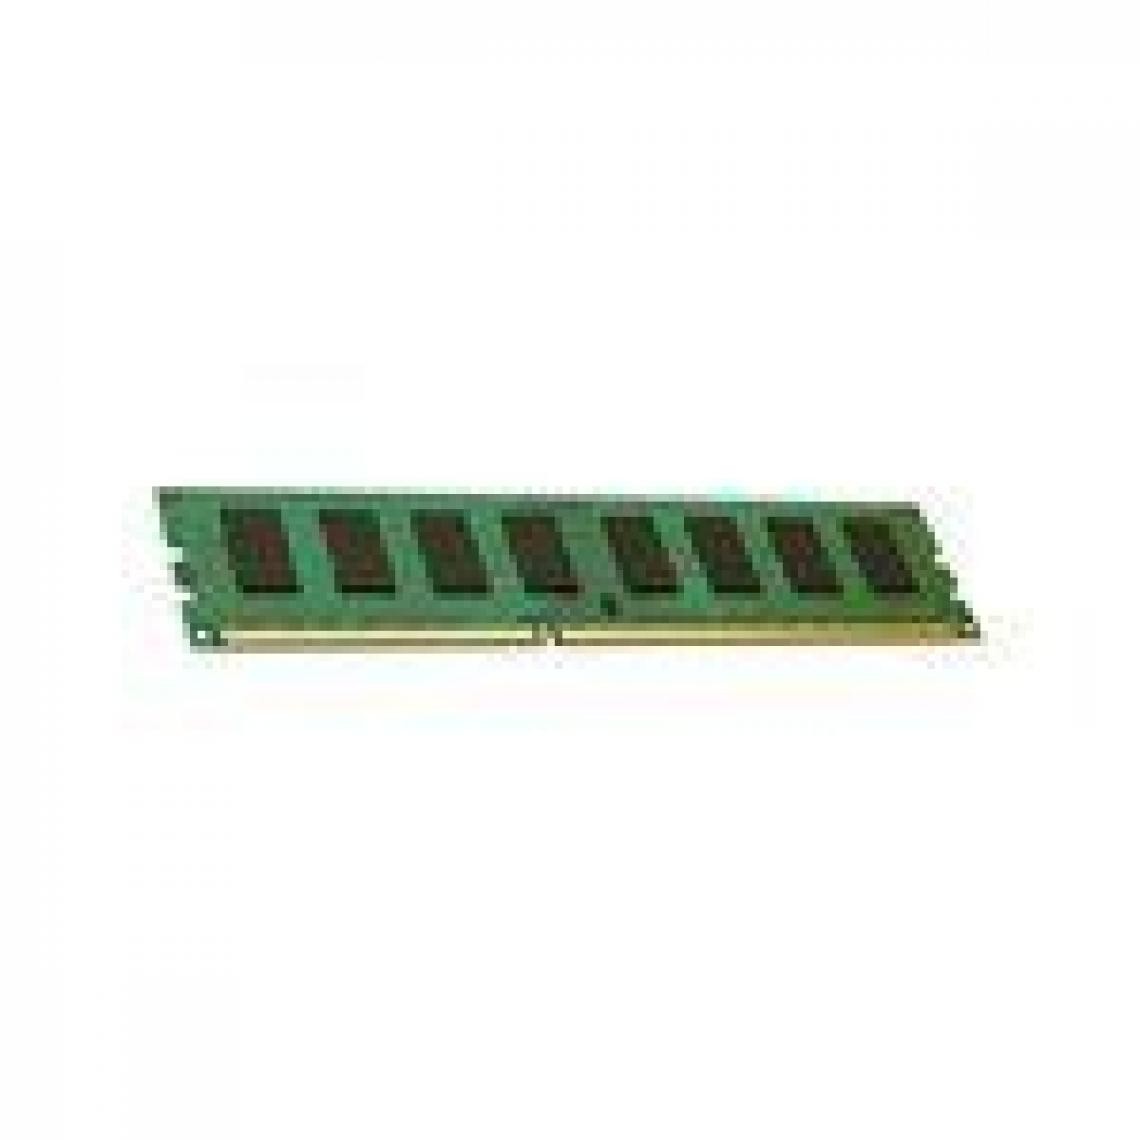 Because Music - MicroMemory 16GB DDR3L 1600MHZ 16Go DDR3L 167MHz module de mémoire - Modules de mémoire (16 Go, DDR3L, 167 MHz) - RAM PC Fixe